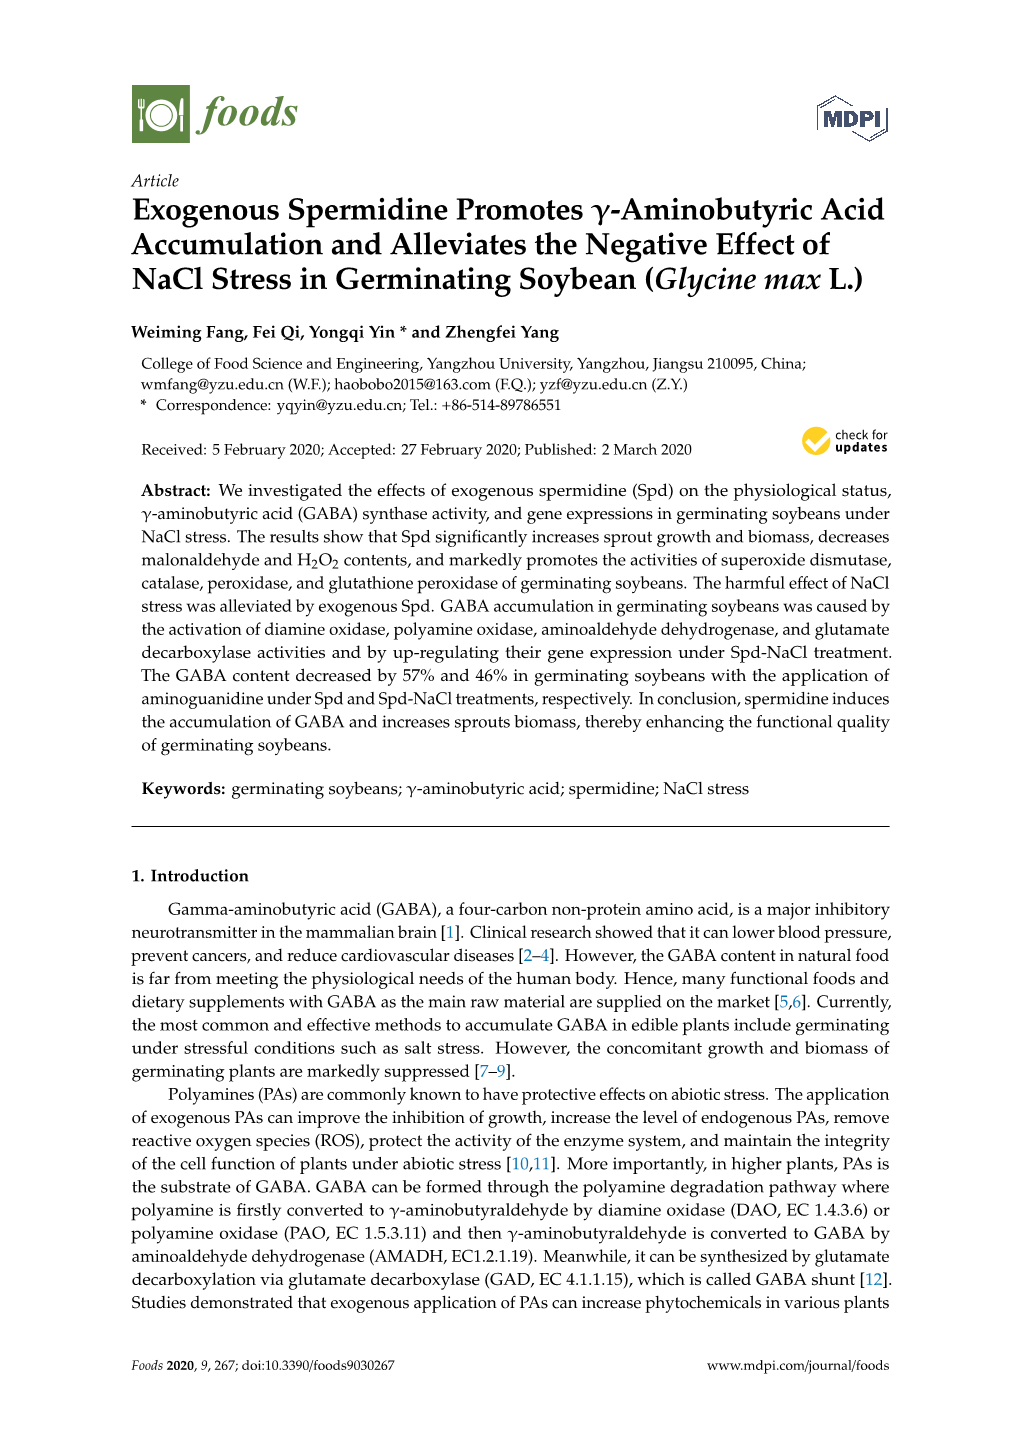 Exogenous Spermidine Promotes Γ-Aminobutyric Acid Accumulation and Alleviates the Negative Effect of Nacl Stress in Germinating Soybean (Glycine Max L.)